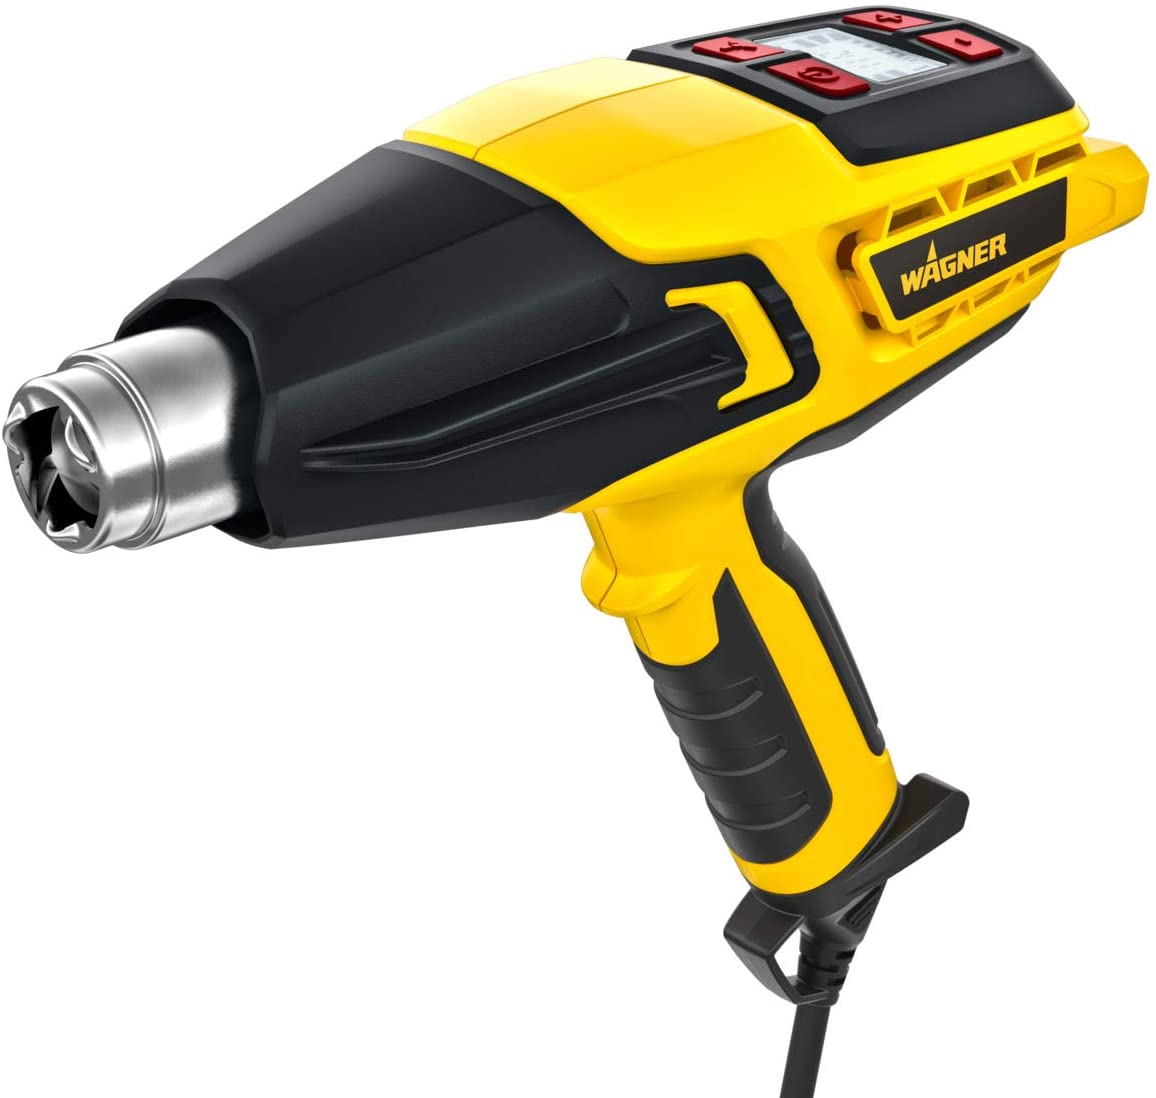 Wagner Heat Gun Furno 750 , 50°C - 630°C, 2000 W, memory function, airflow capacity 820 l/min, Digital LCD display, incl. concentrator, reflector, glass protection, wide nozzle, scraper, carry case